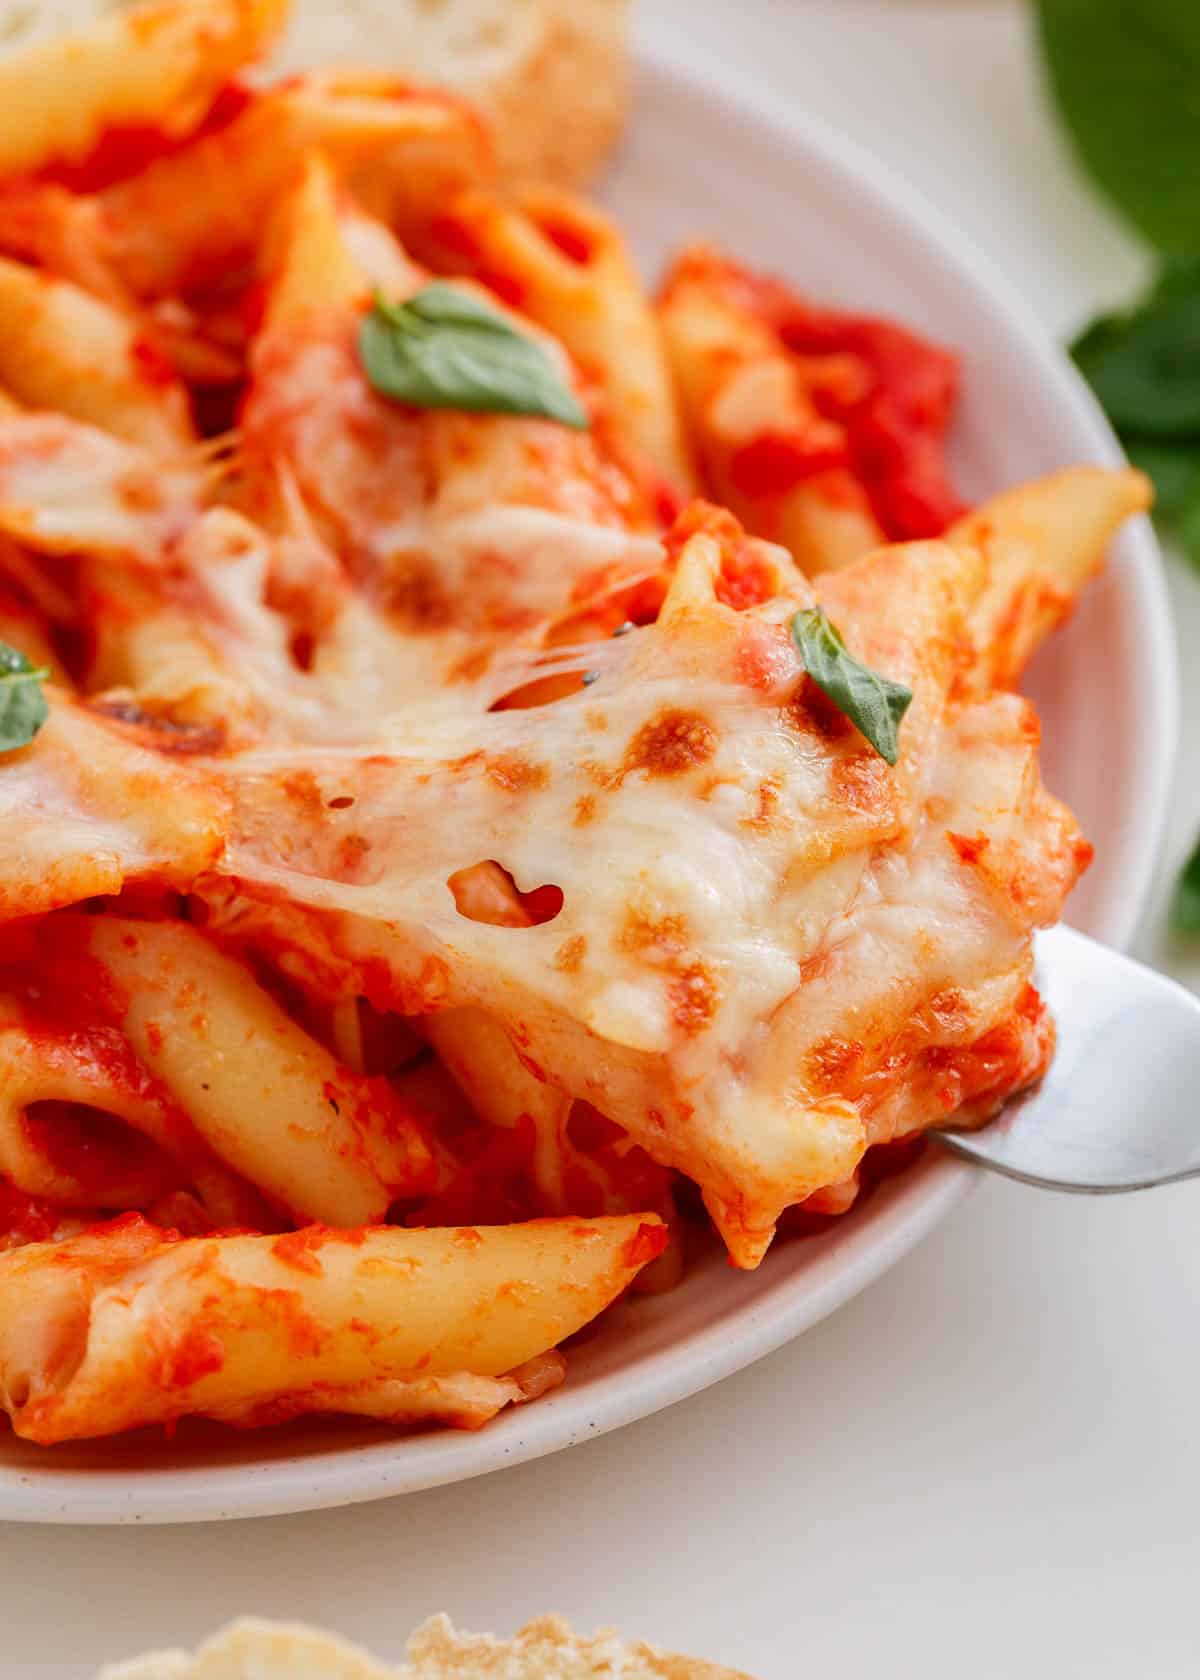 Baked mostaccioli on a plate.